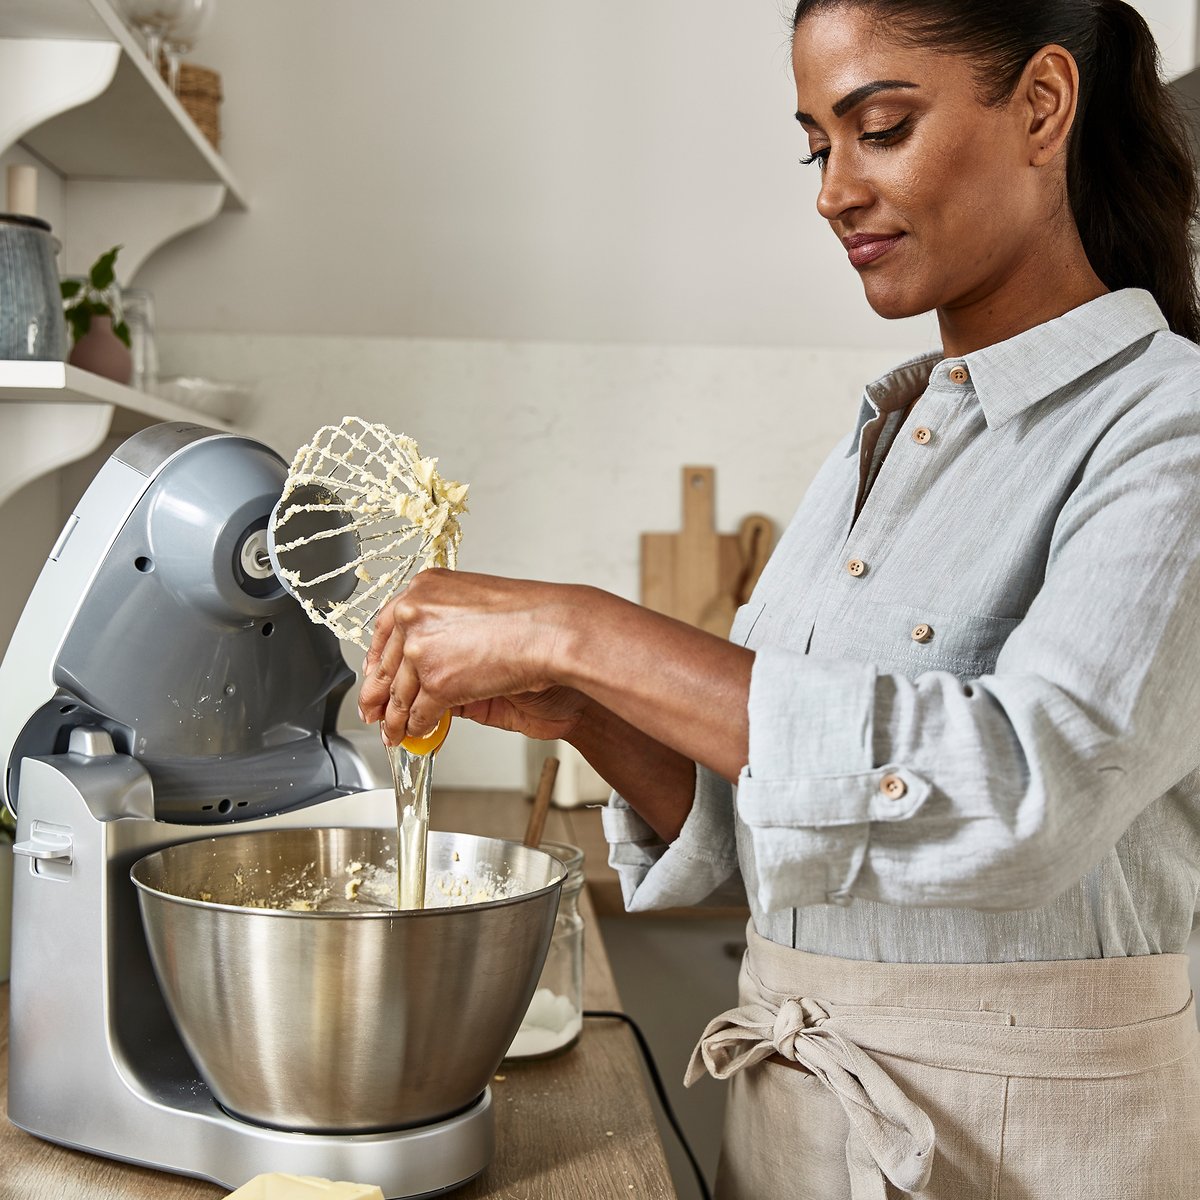 Kenwood Prospero+ Stand Mixer, 3 Attachments - Free Delivery